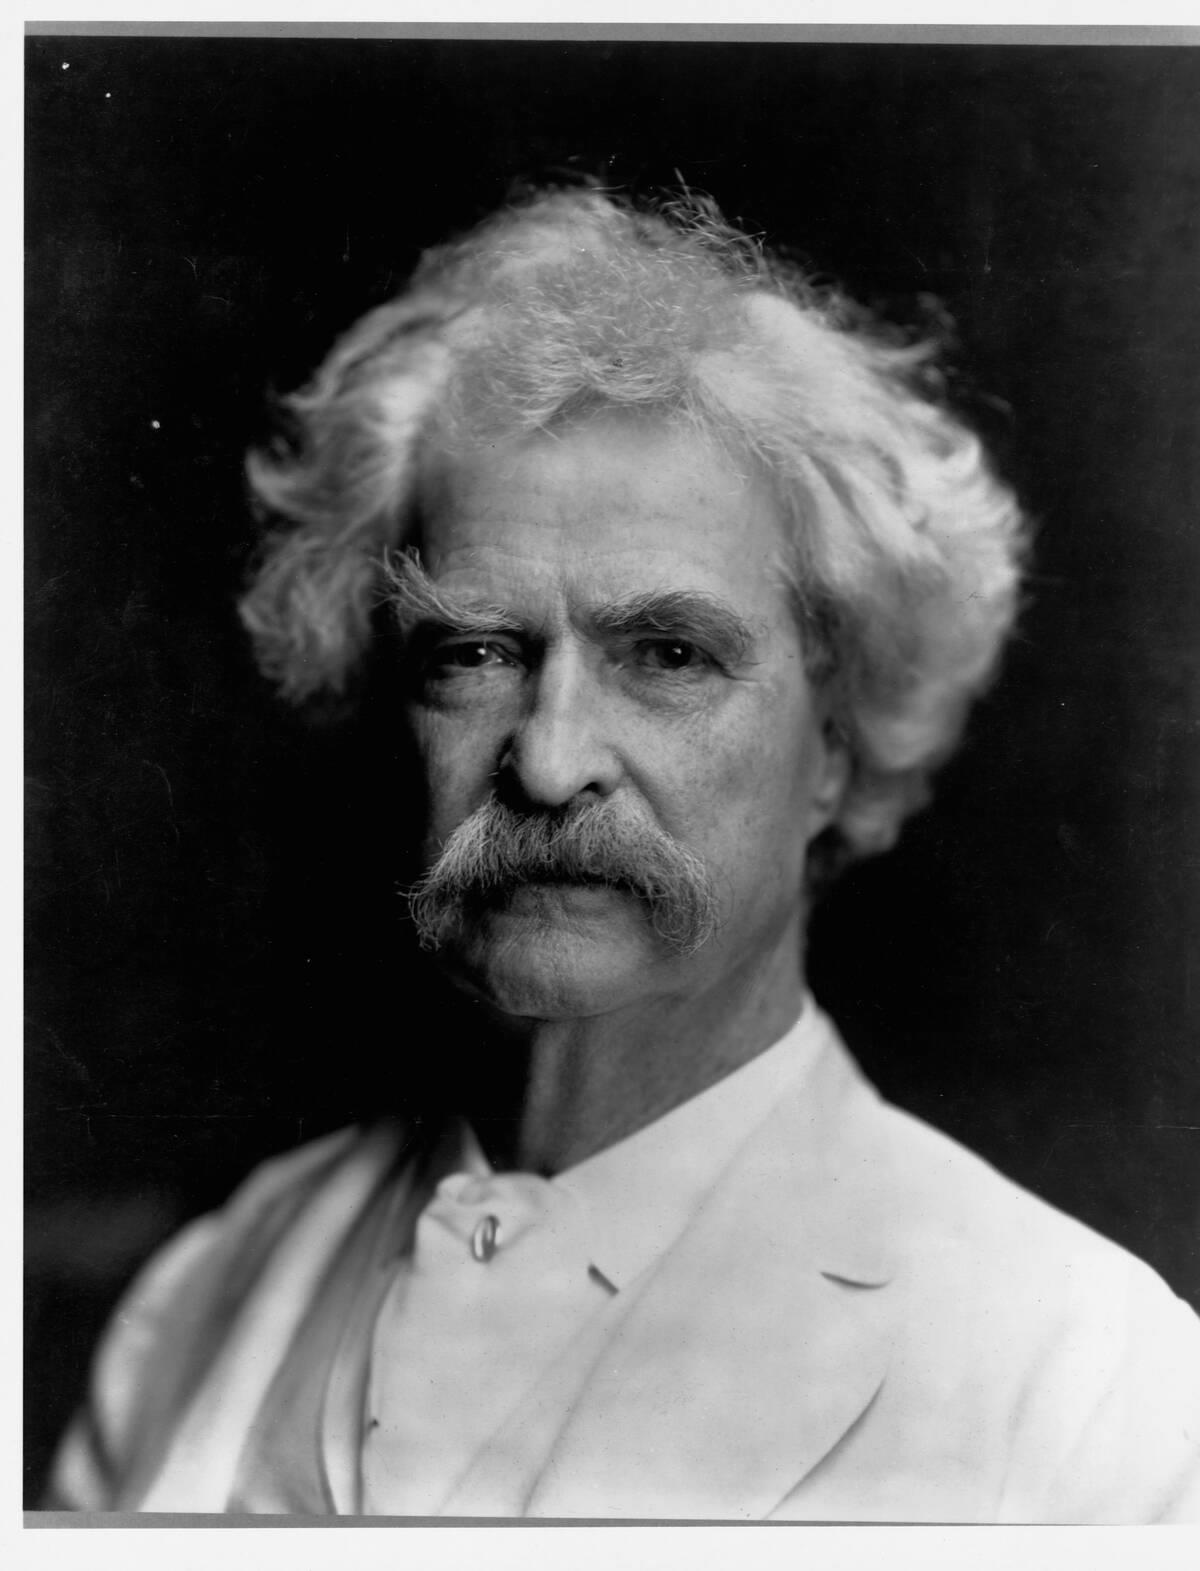 <p>Mark Twain patented many of his own inventions. One was a garment fastener with a removable band that he envisioned on vests and pantaloons. The fastener never caught on with vests or pantaloons, but it did evolve into our modern bra strap.</p> <p>His other successful patent was a self-pasting scrapbook, which, according to <i>The St. Louis Post Dispatch,</i> made him $50,000 . But his other investments, including a history trivia game and Paige typesetting machine, flopped. Even his own publishing house eventually spiraled into bankruptcy.</p>